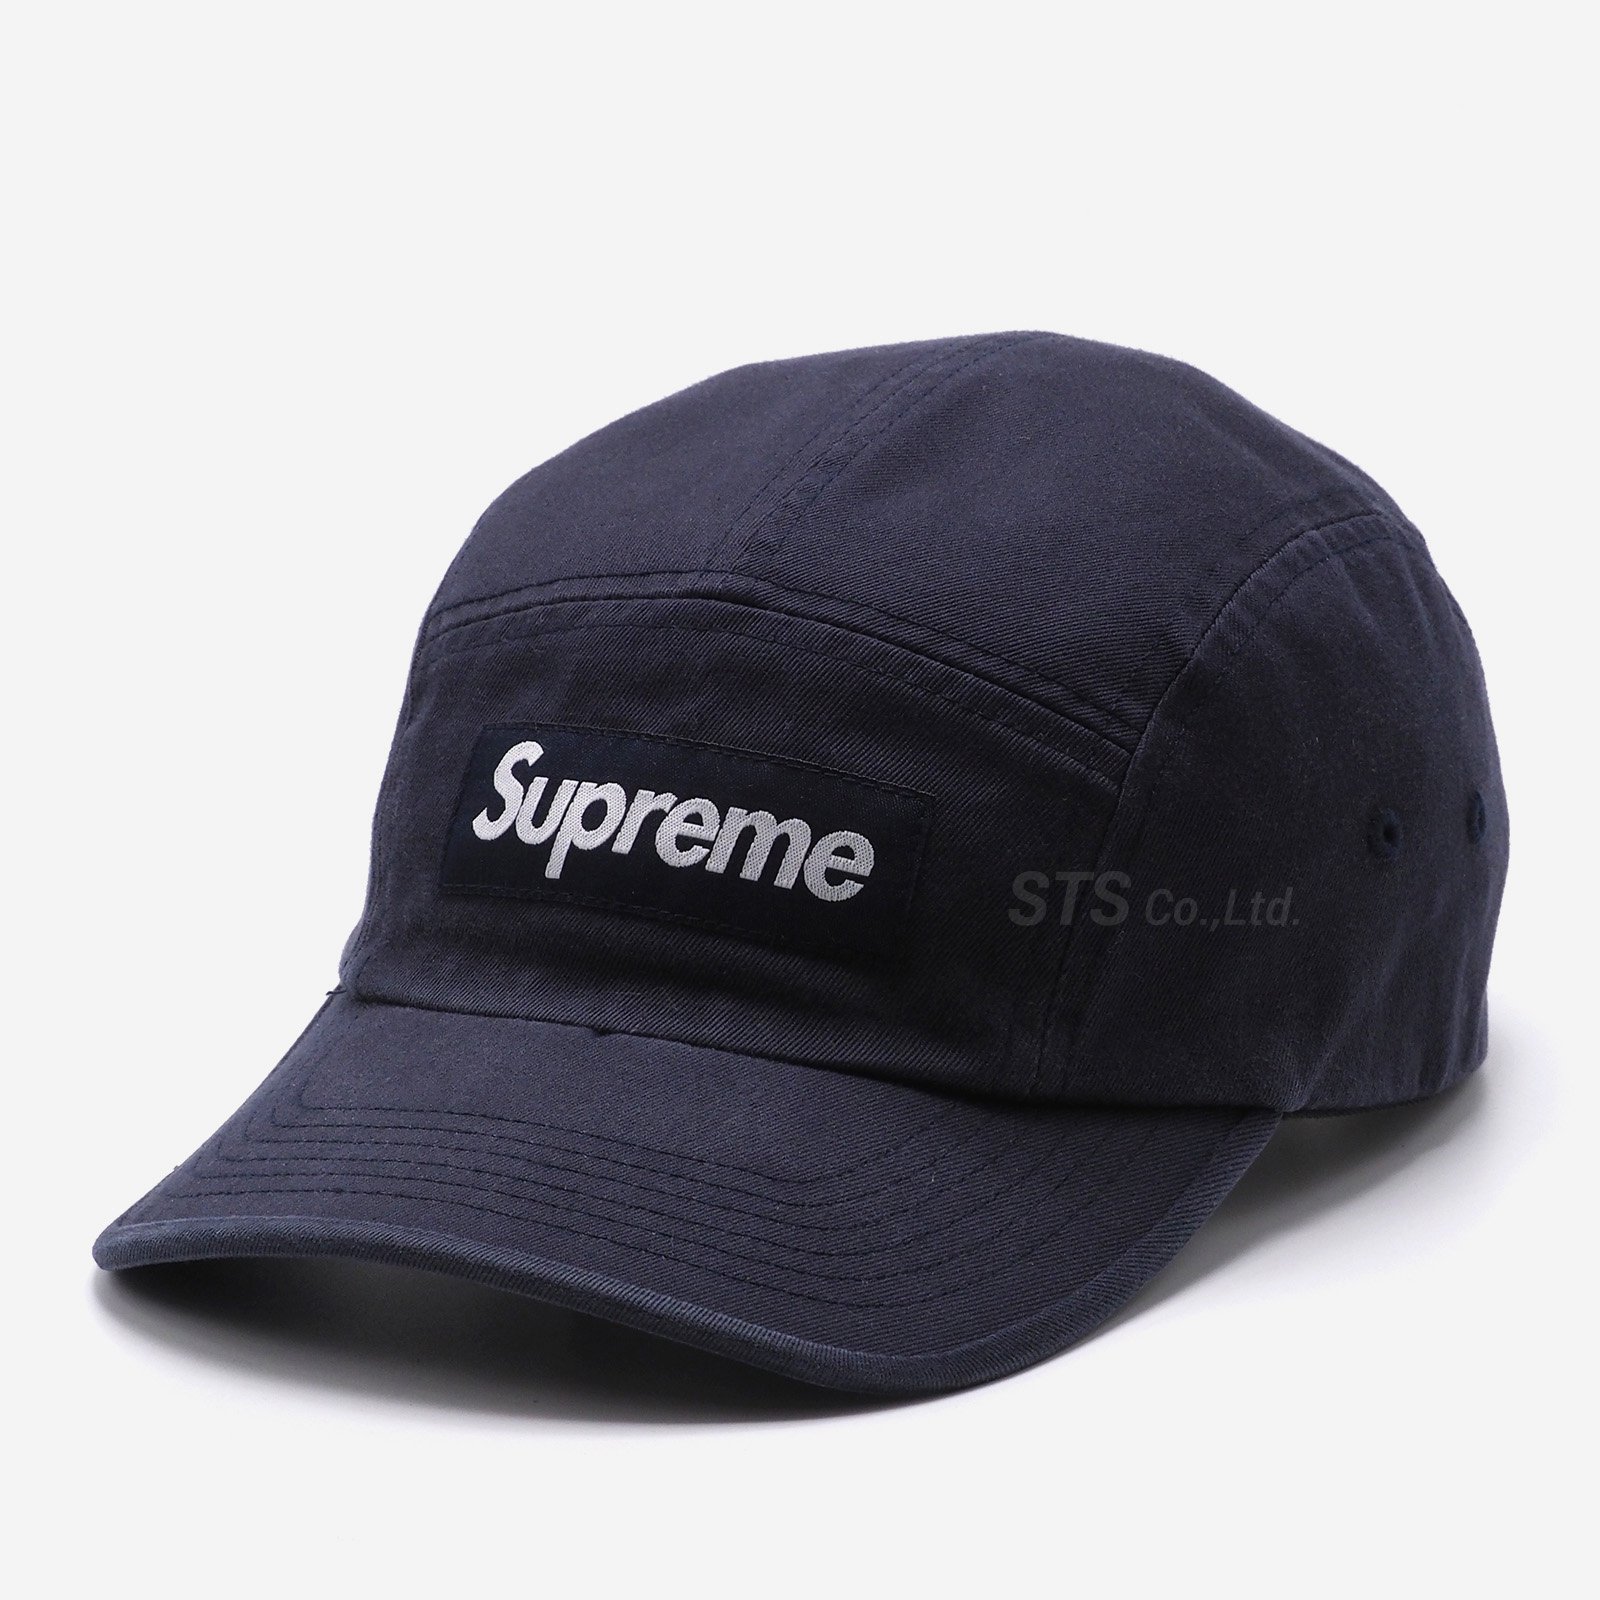 Washed Chino Twill Camp Cap